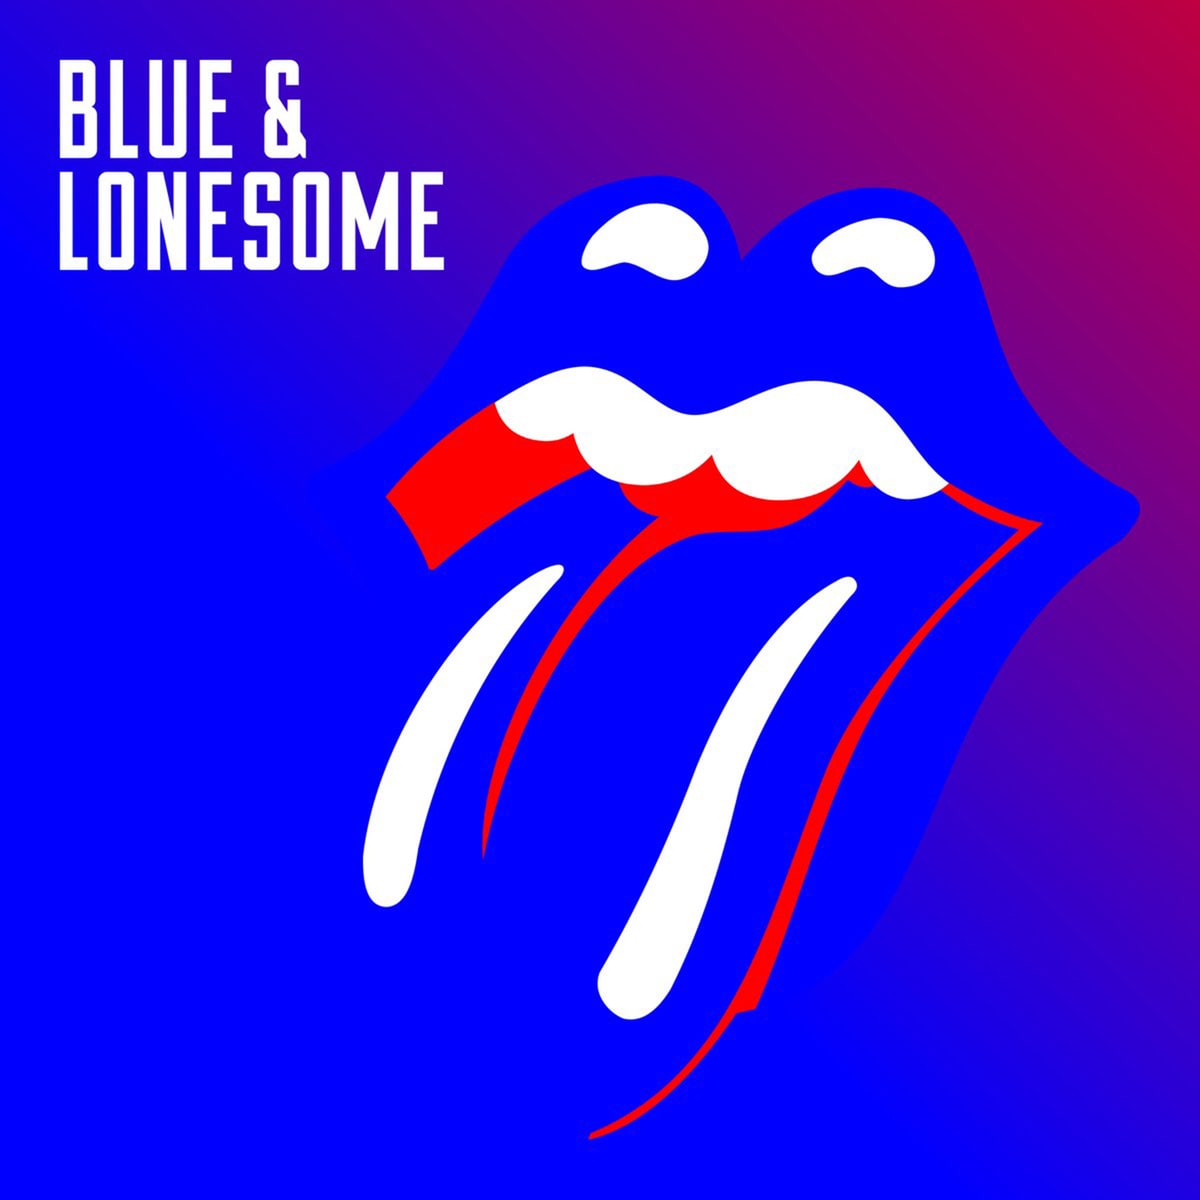 Rolling Stones, The - Blue & Lonesome cover